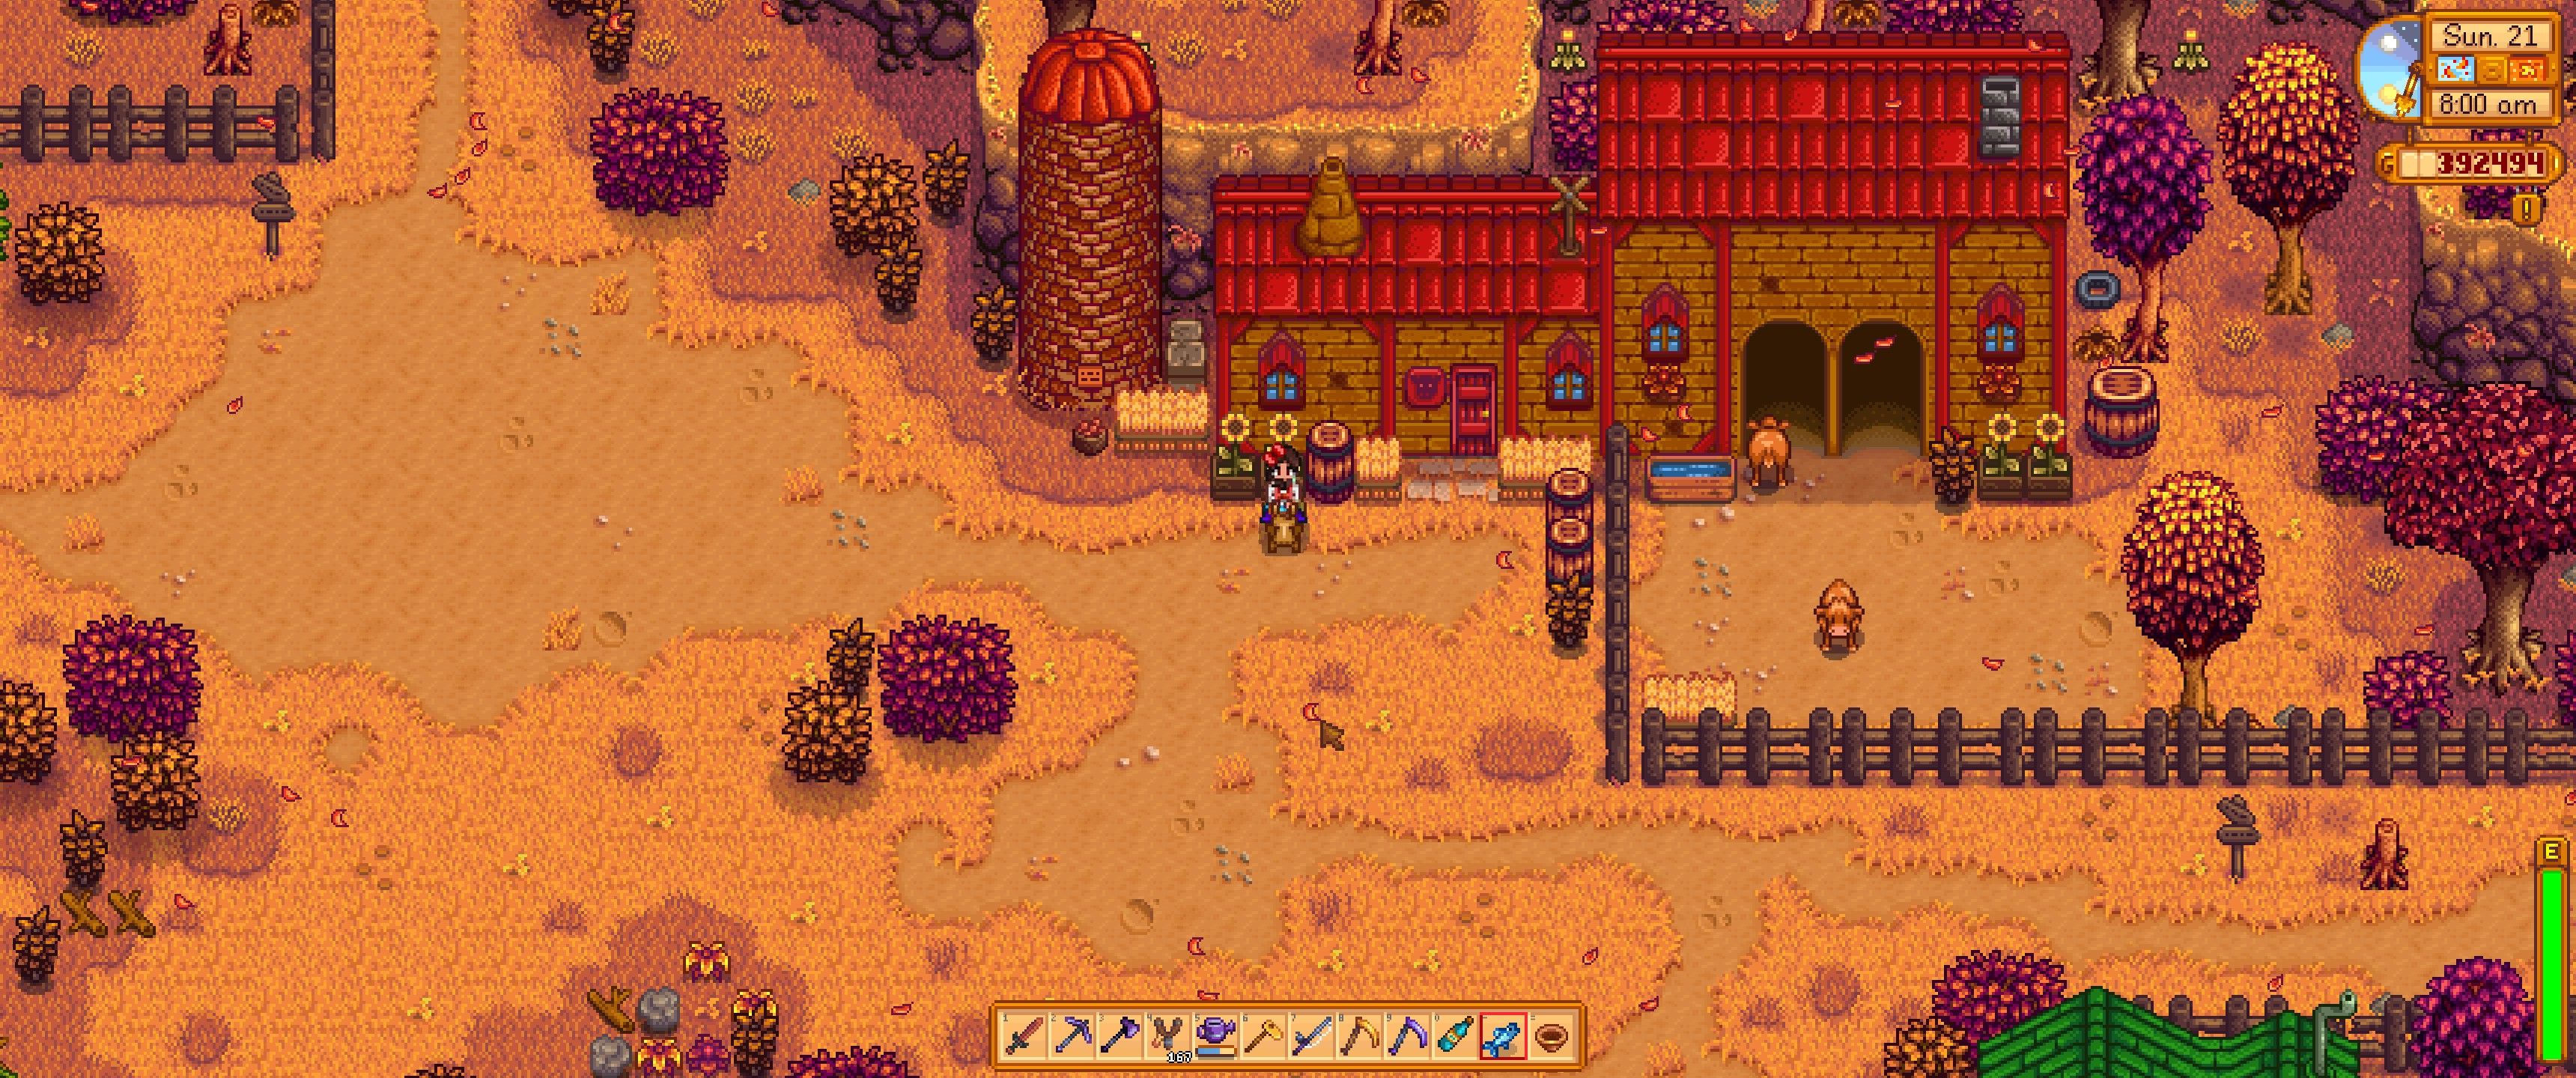 Stardew Valley: The player stands in front of Marnie's shop